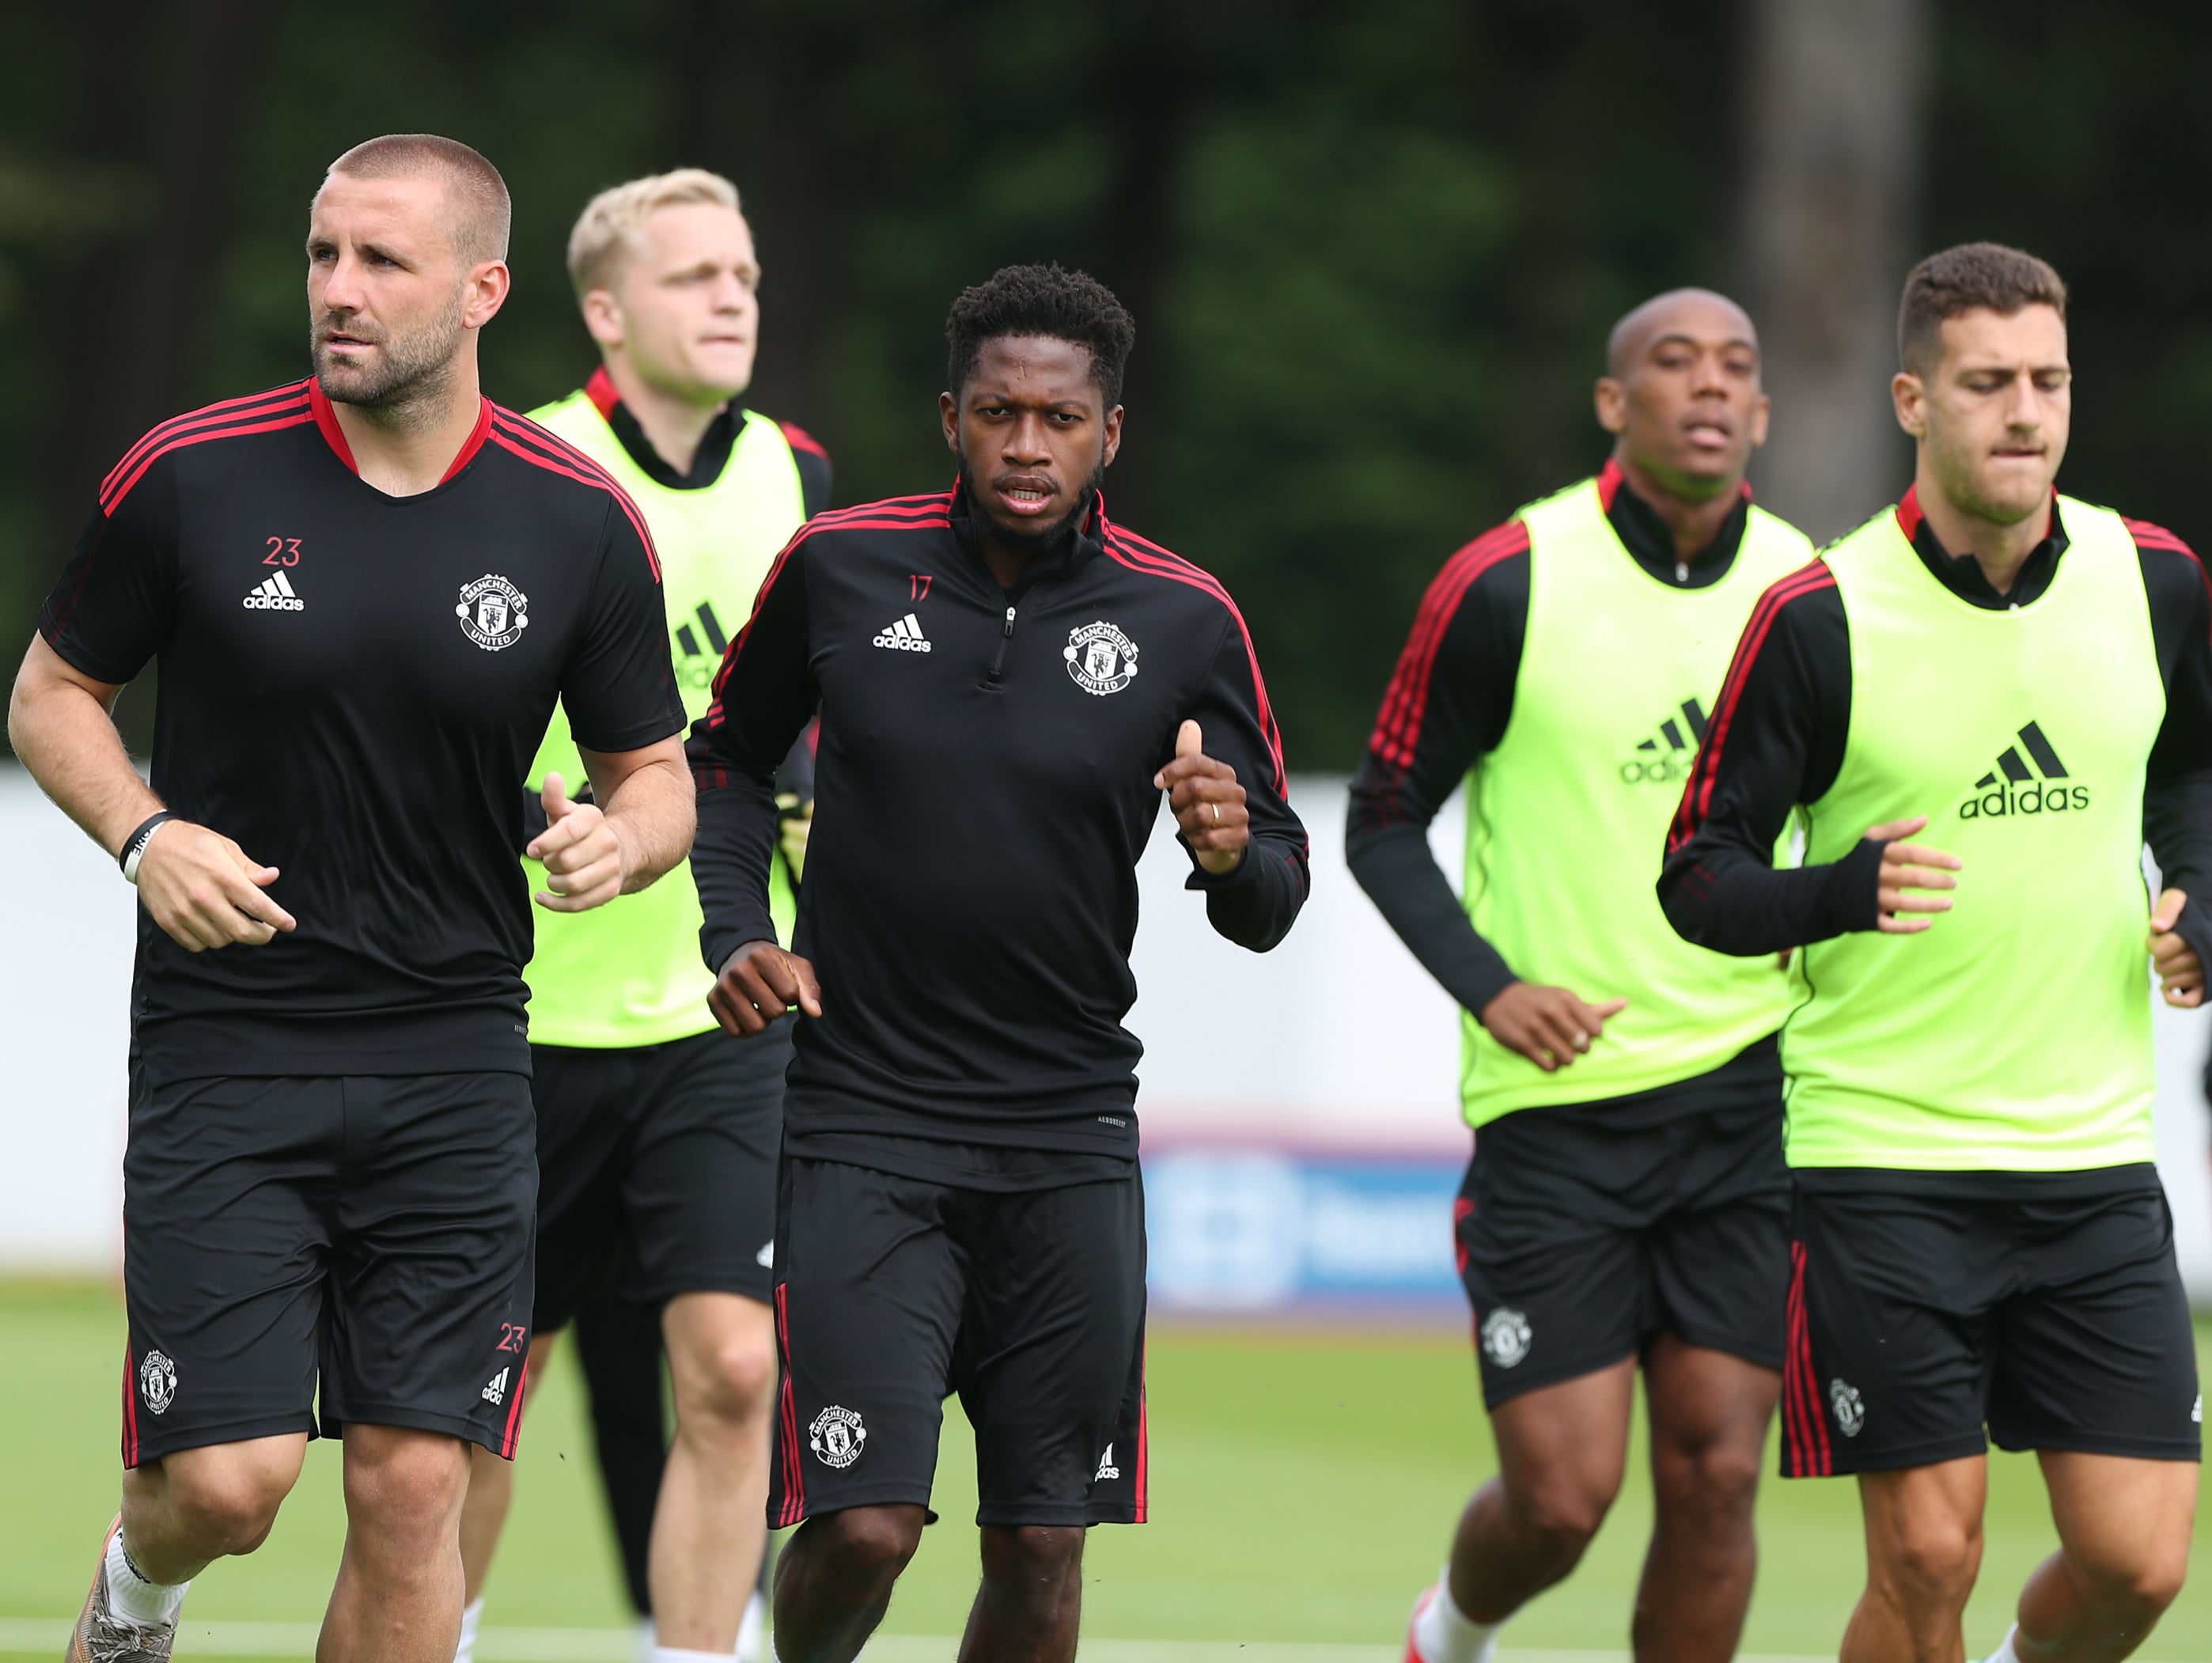 Manchester United players in training at Carrington